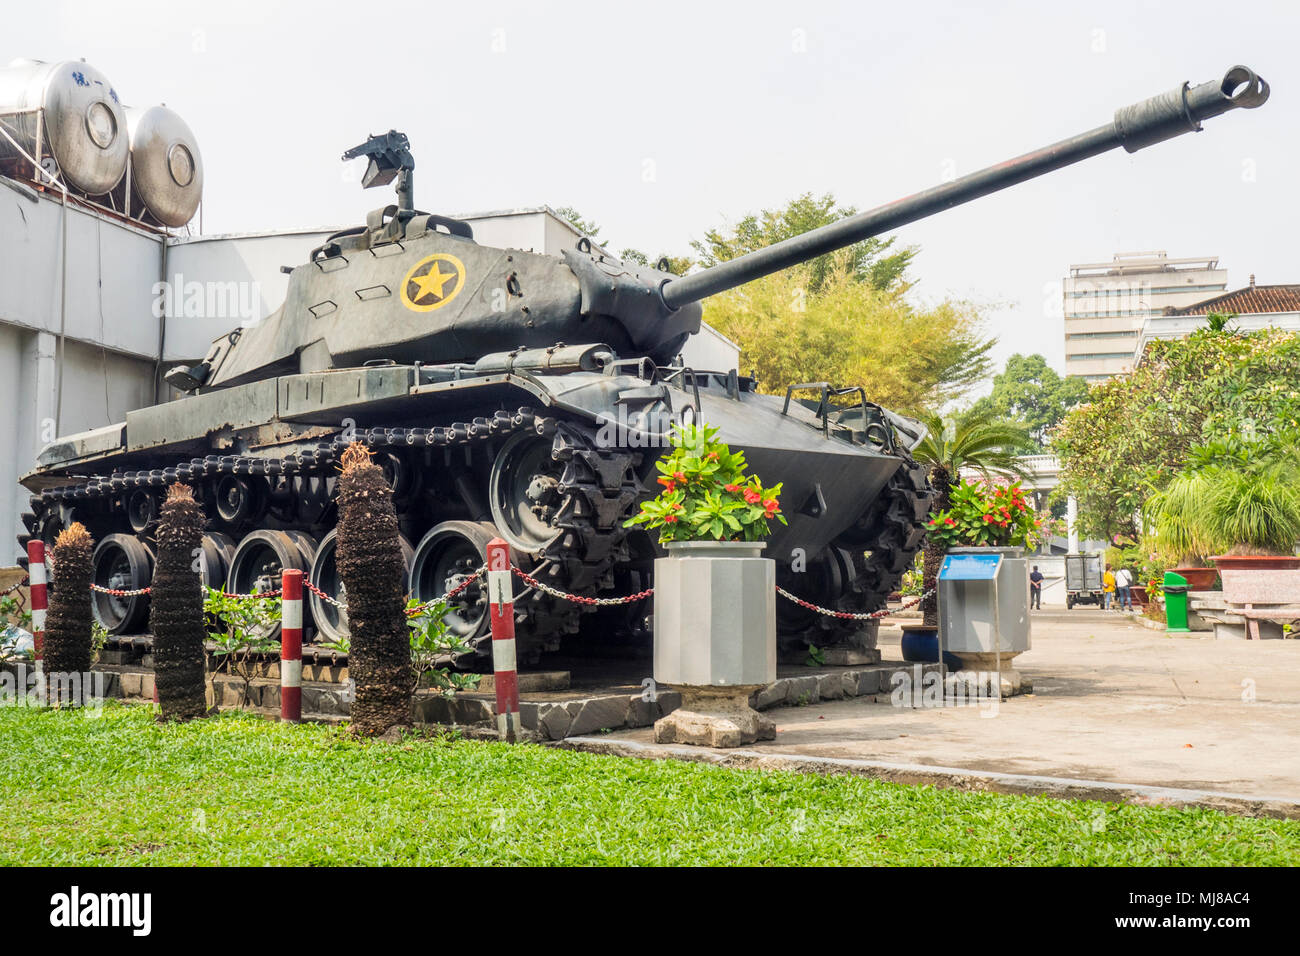 An American M41 Walker Bulldog tank used in the Vietnam War on display  outside Gia Long Palace now the Ho Chi Minh City Museum, Vietnam Stock  Photo - Alamy